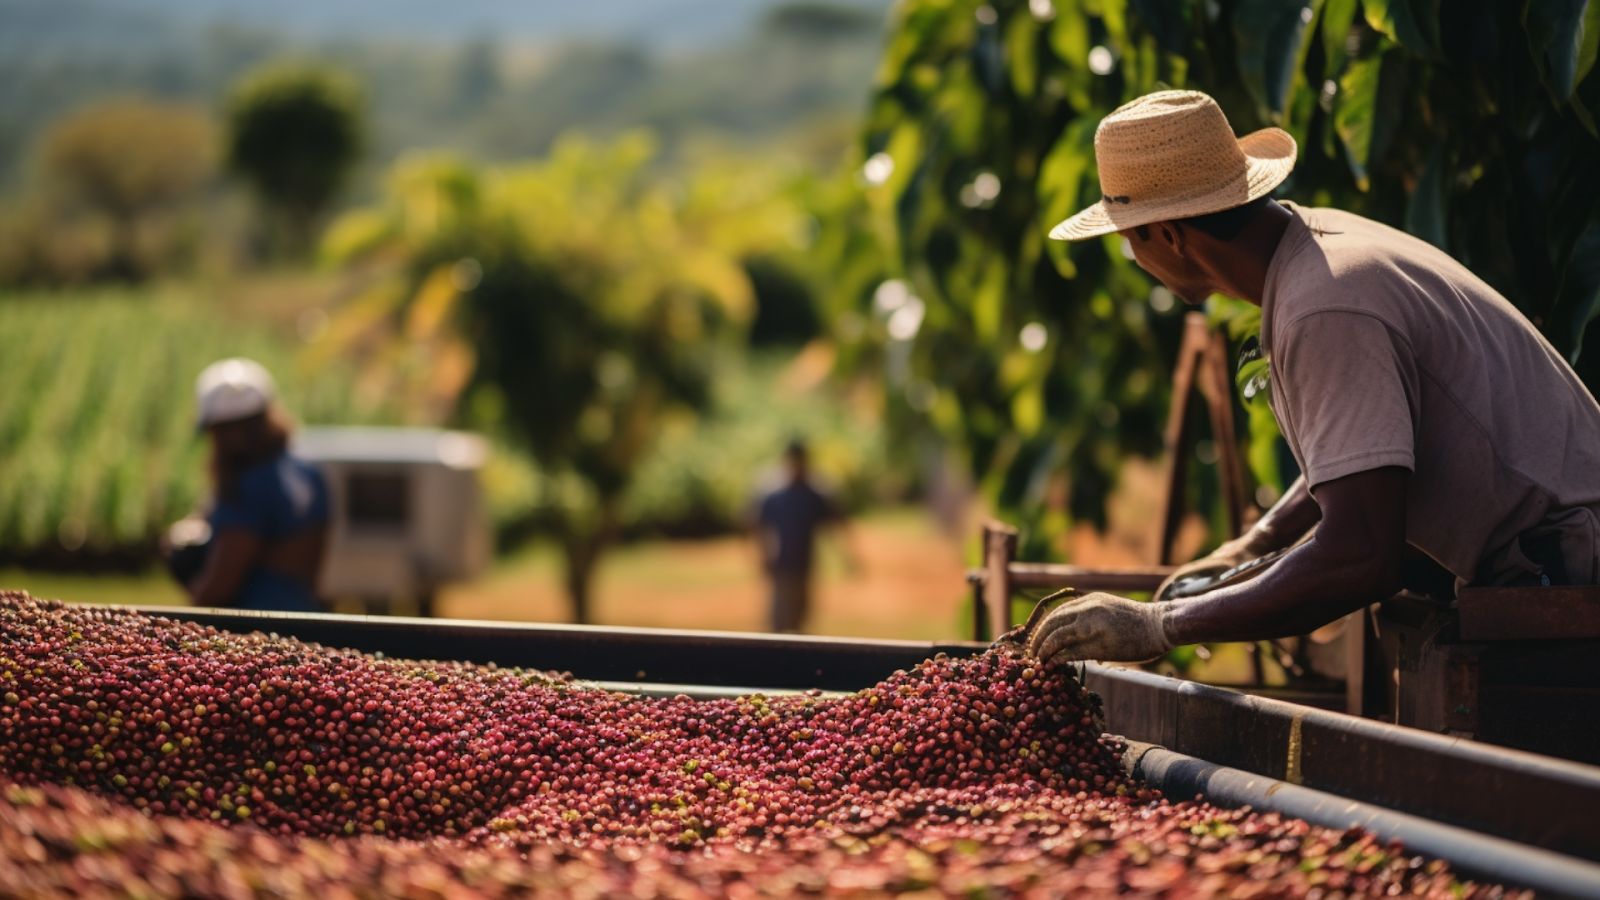 A worker meticulously sorts through a rich bounty of red coffee berries, showcasing the hands-on approach to Brazil coffee production.